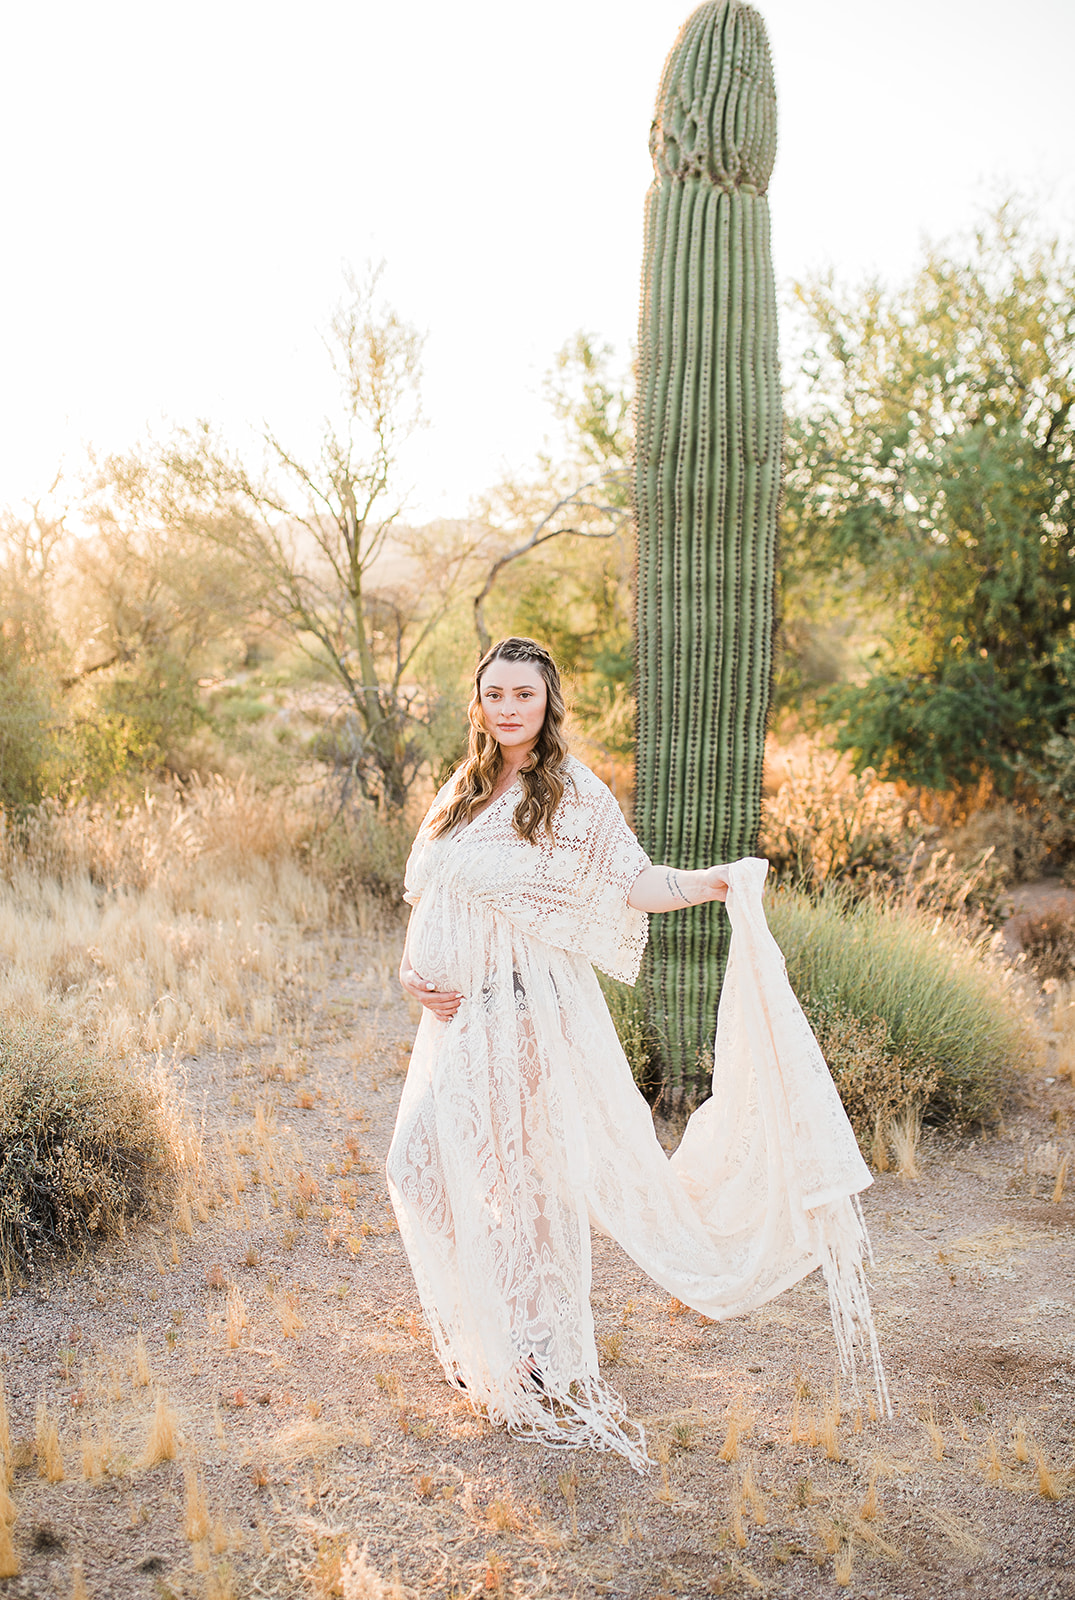 A mom to be in a lace maternity dress stands in a desert with a cactus holding her train behind her after meeting Phoenix midwives